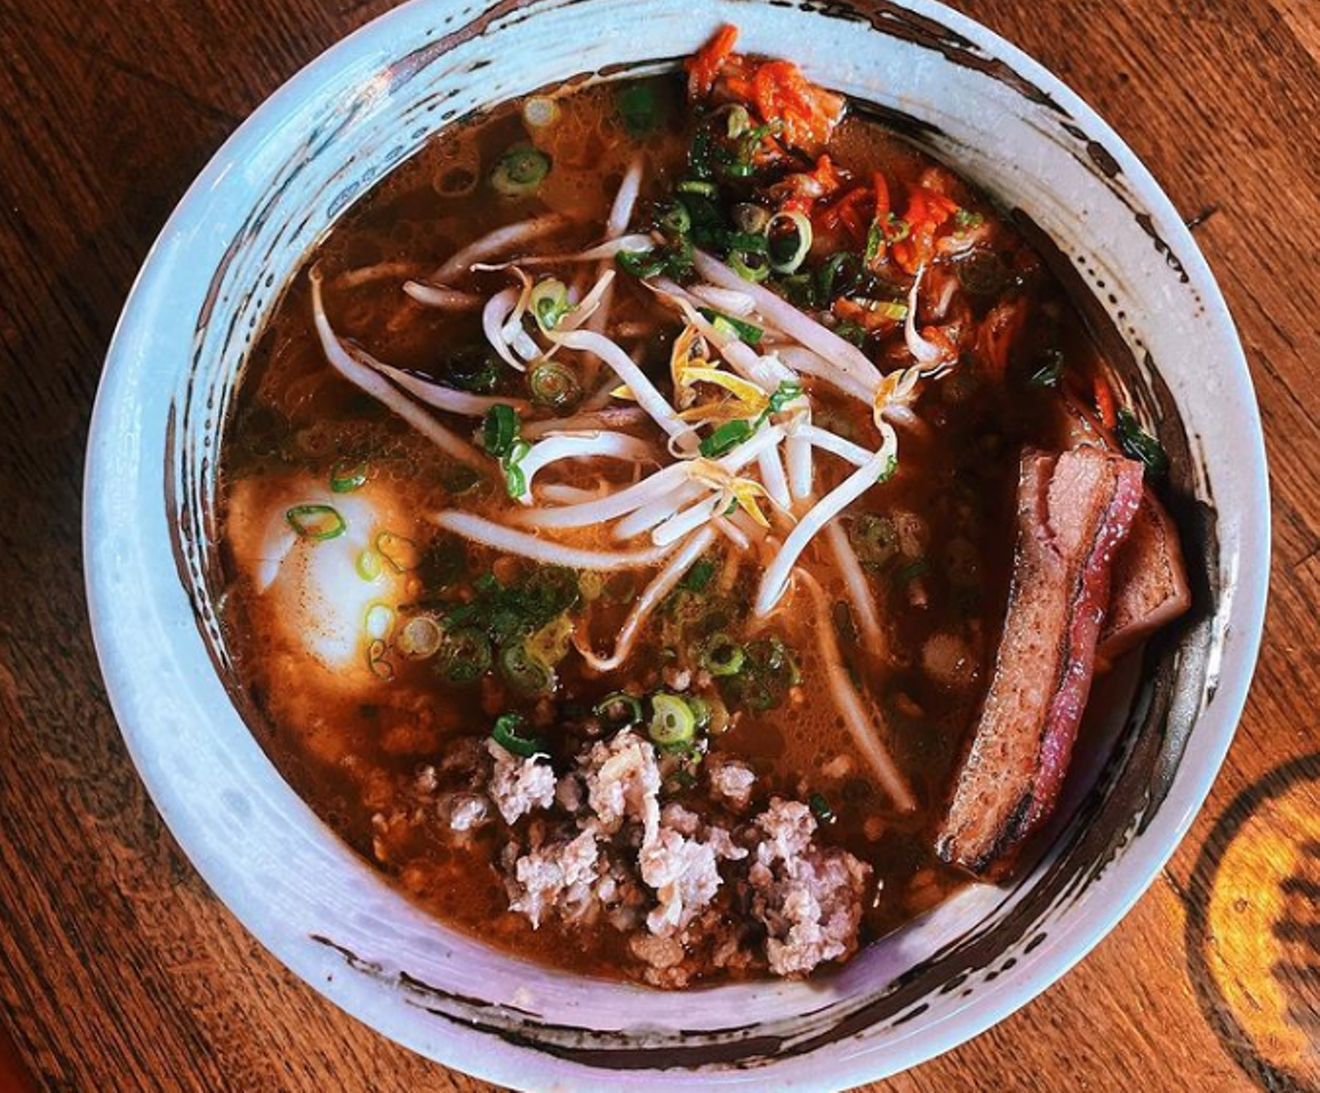 Glo introduced this new kimchi ramen in December.